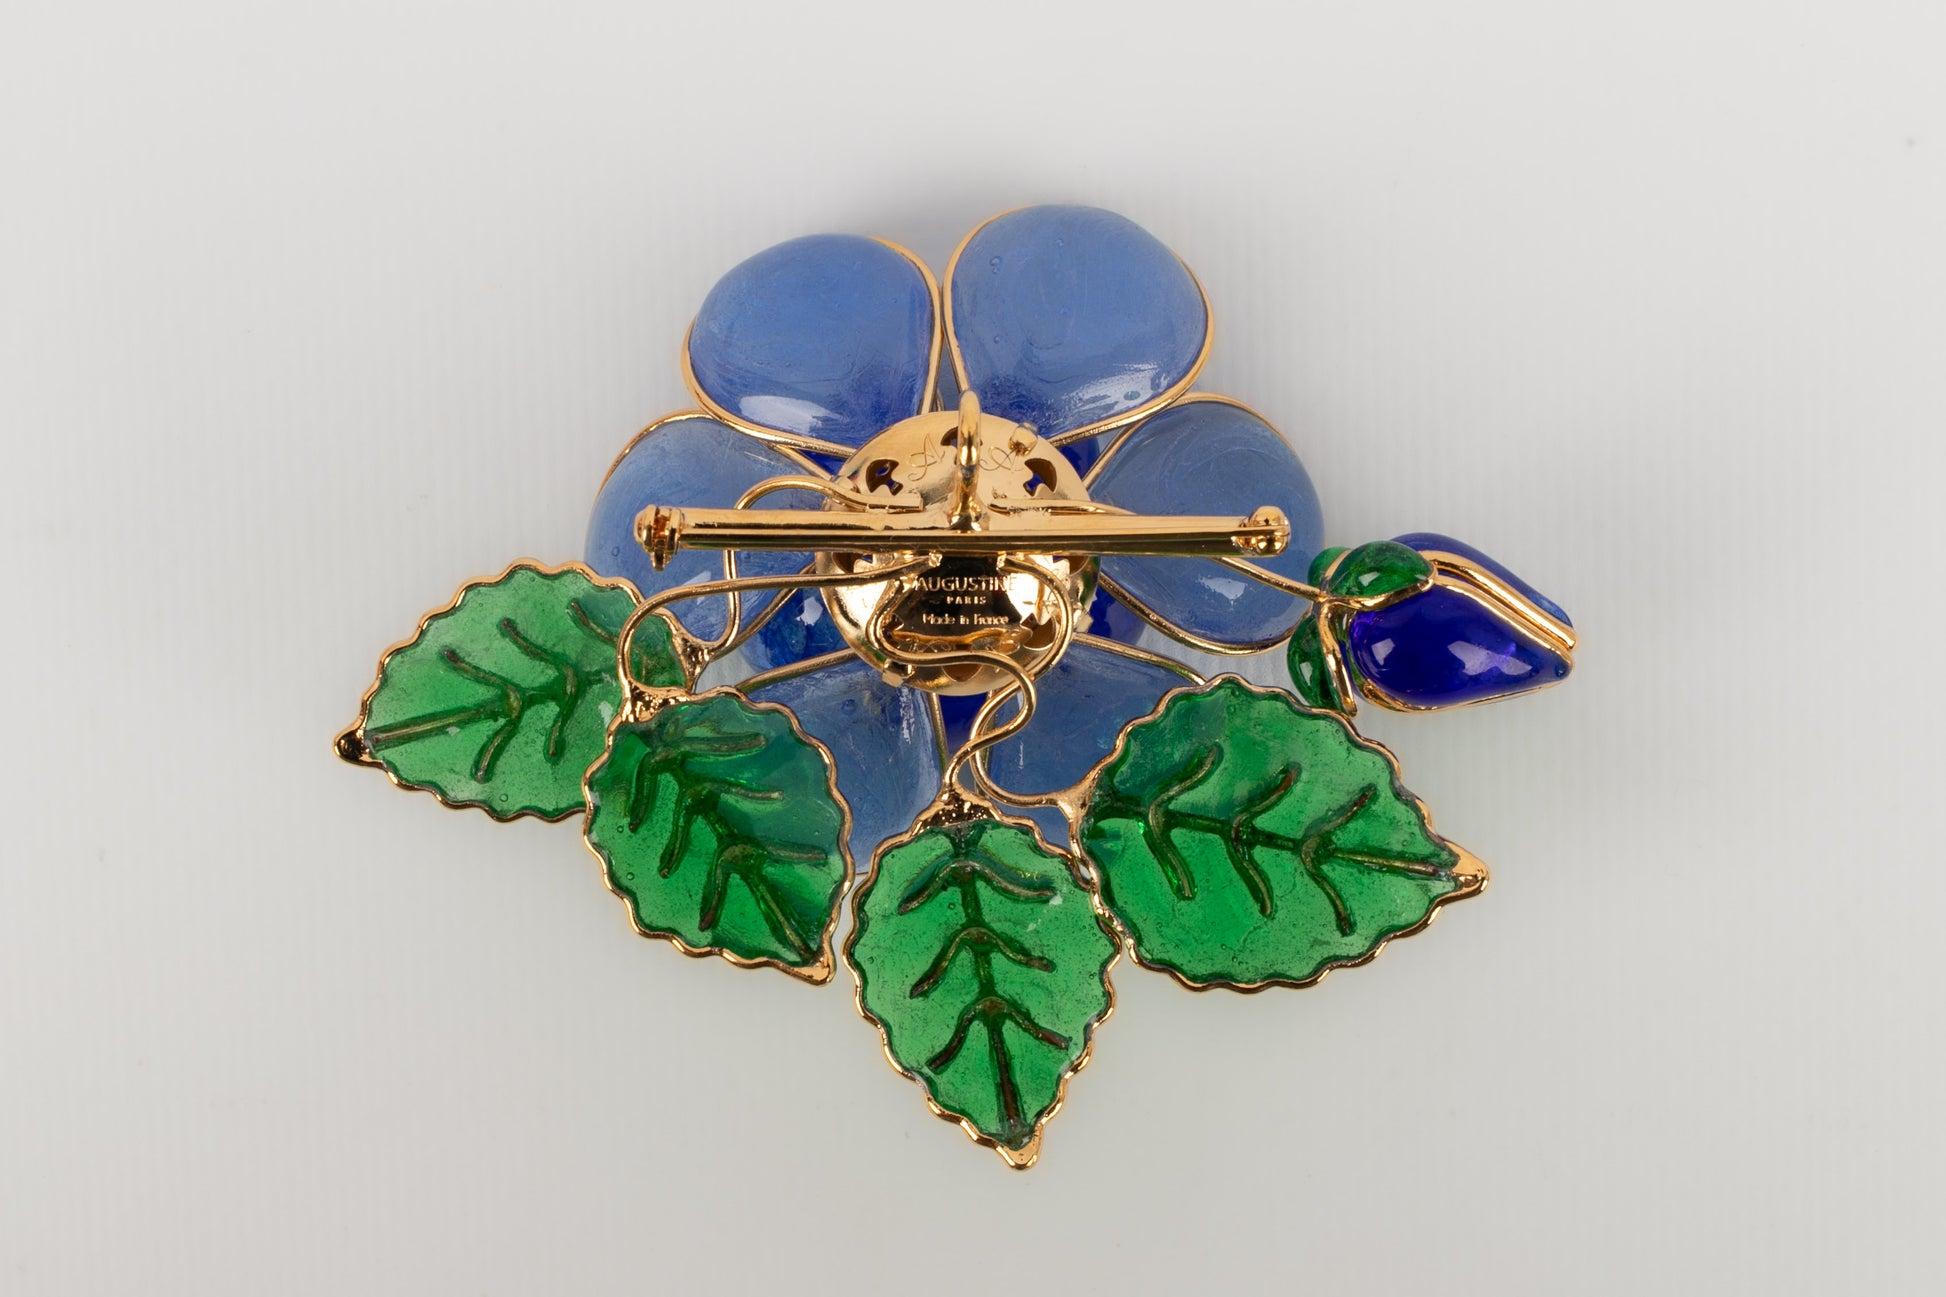 Augustine - (Made in France) Golden metal and glass paste brooch/pendant representing a flower.

Additional information:
Condition: Very good condition
Dimensions: 9.5 cm x 8 cm

Seller Reference: BR166
